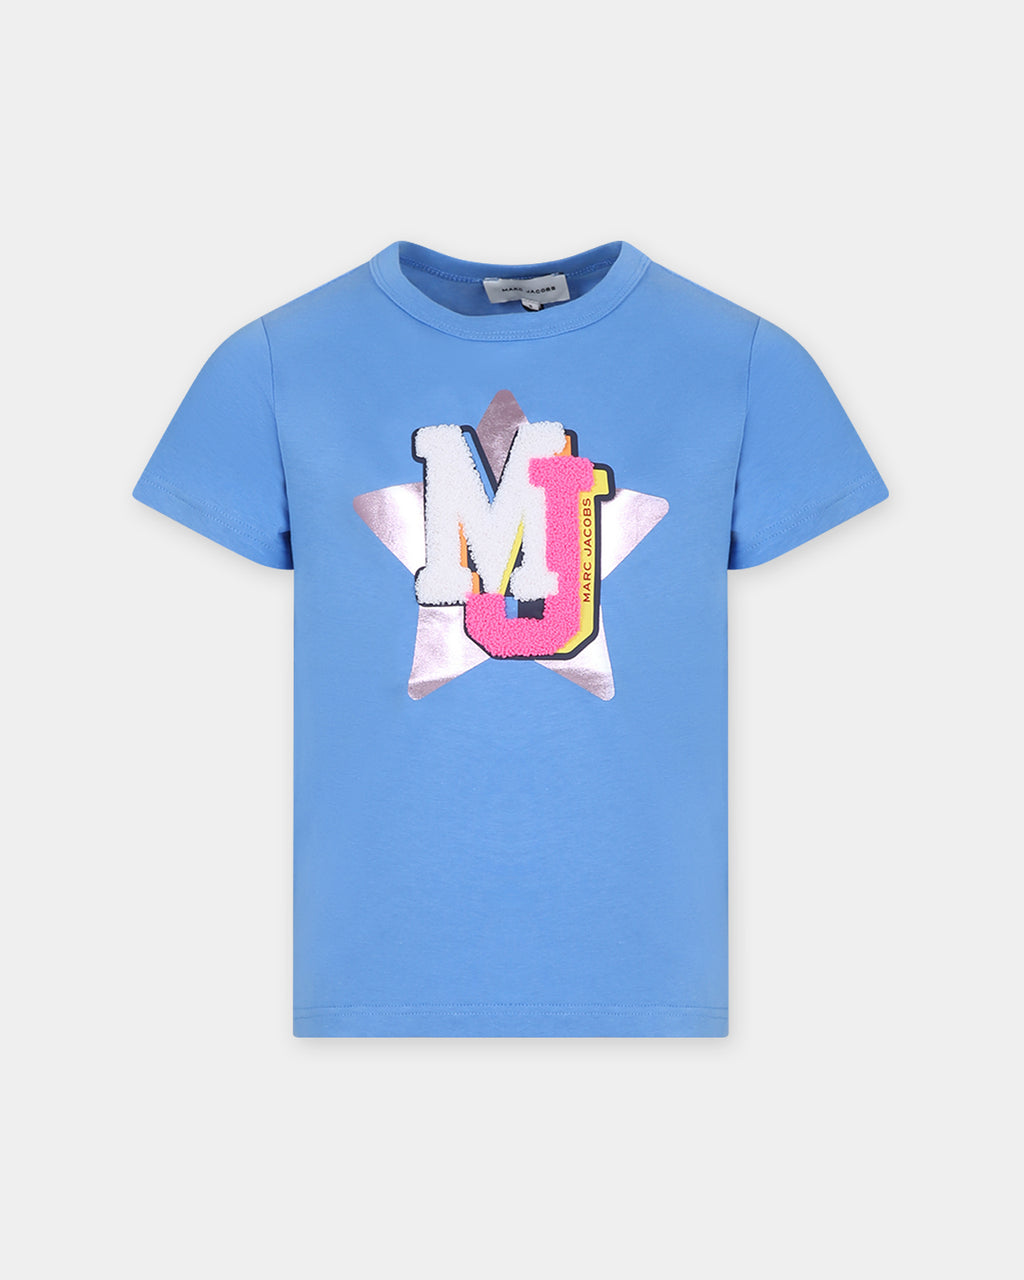 Light blue t-shirt for girl with logo and star